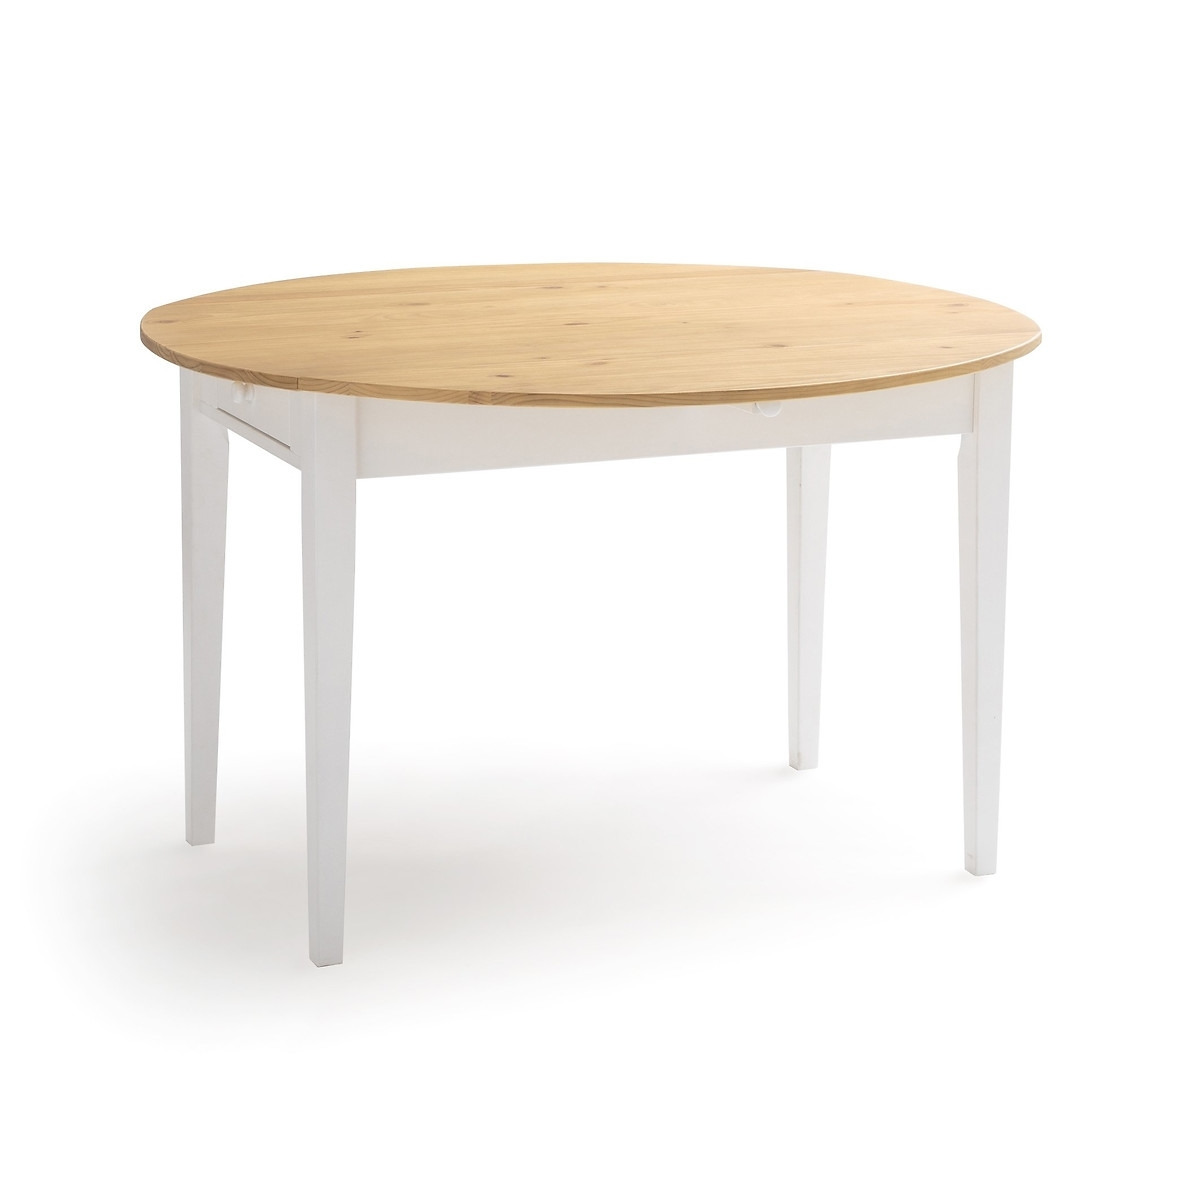 Alvina Round Dining Table with 2 Drawers (Seats 4-6) - image 1